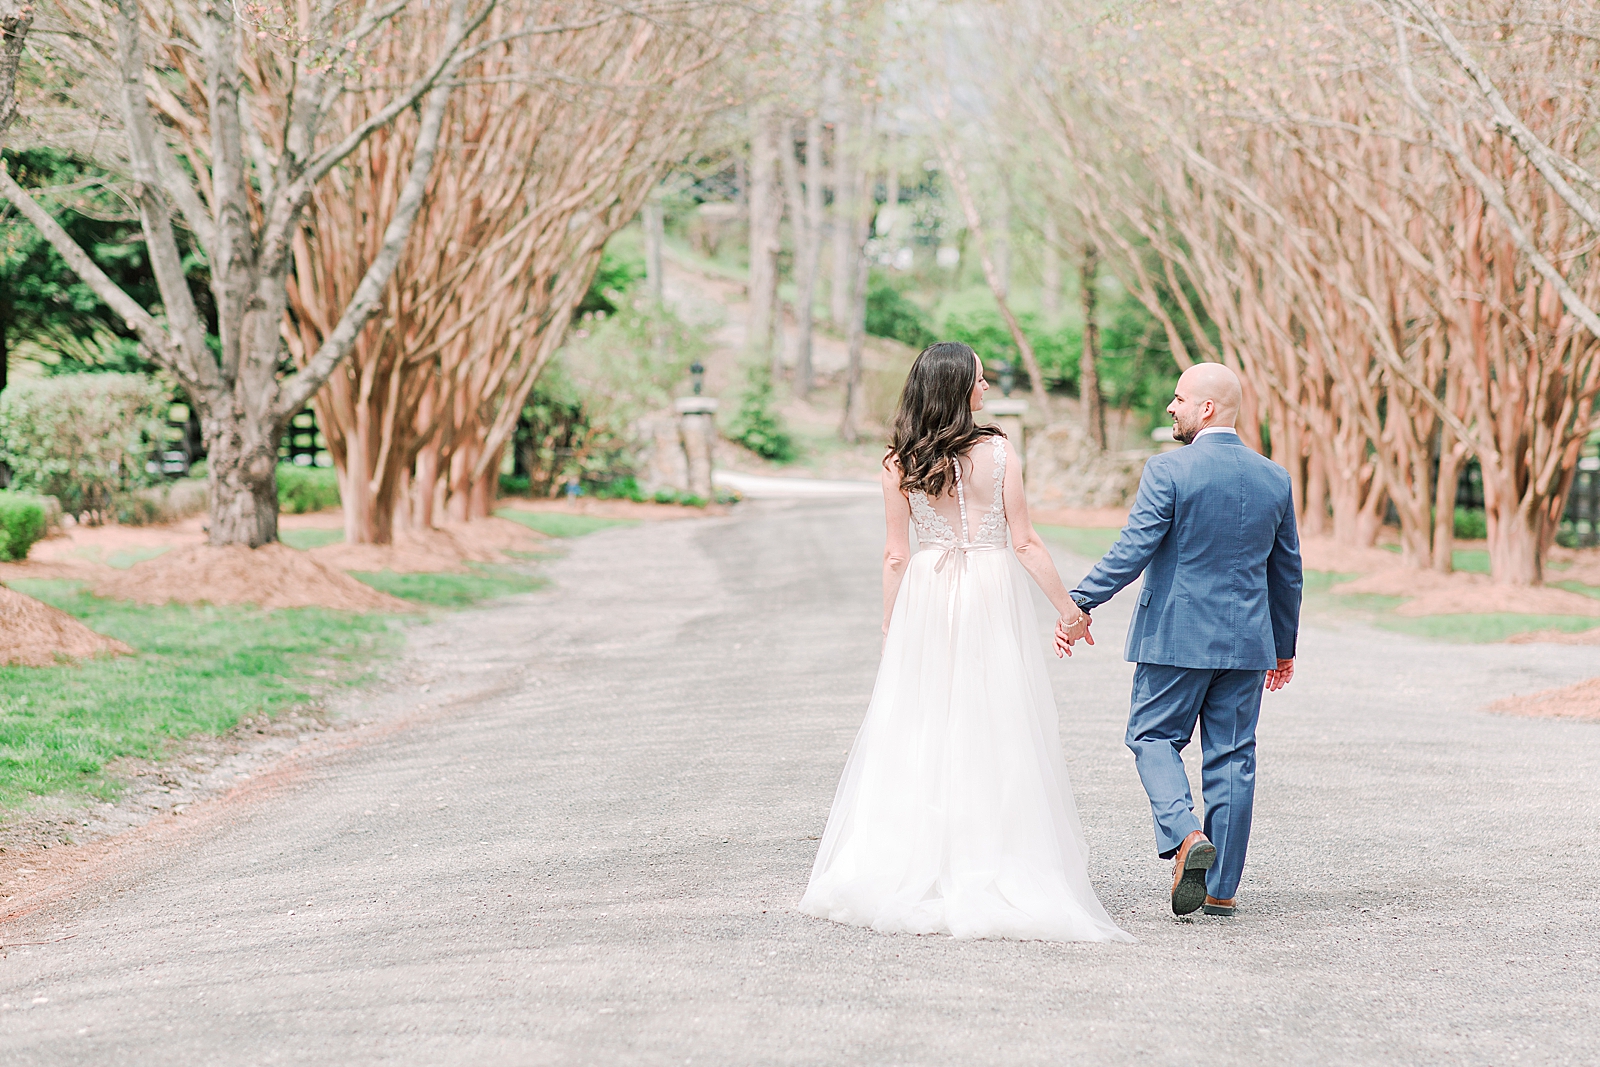 Spring Hawkesdene Wedding Bride and Groom holding hands walking down tree lined driveway Photo